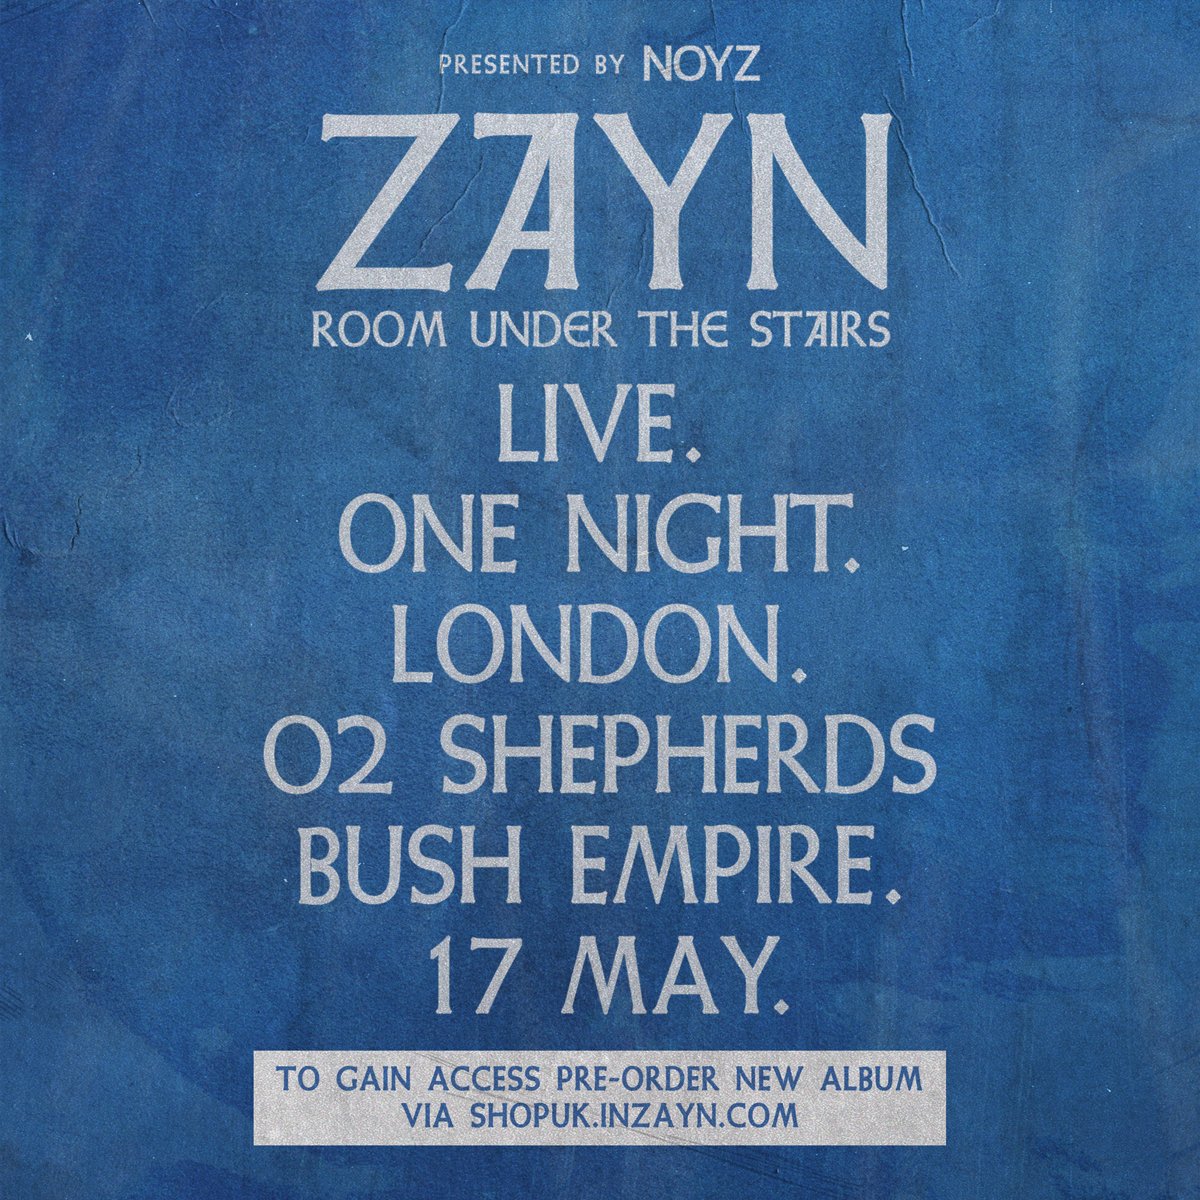 Join @zaynmalik for his FIRST EVER solo live show at London @O2SBE on Fri 17th May - presented by NOYZ 🎉 The debut 6 song performance will follow the world premiere of the 'Road Back to the Mic Documentary' To gain access, pre-order the new album via shopuk.inzayn.com